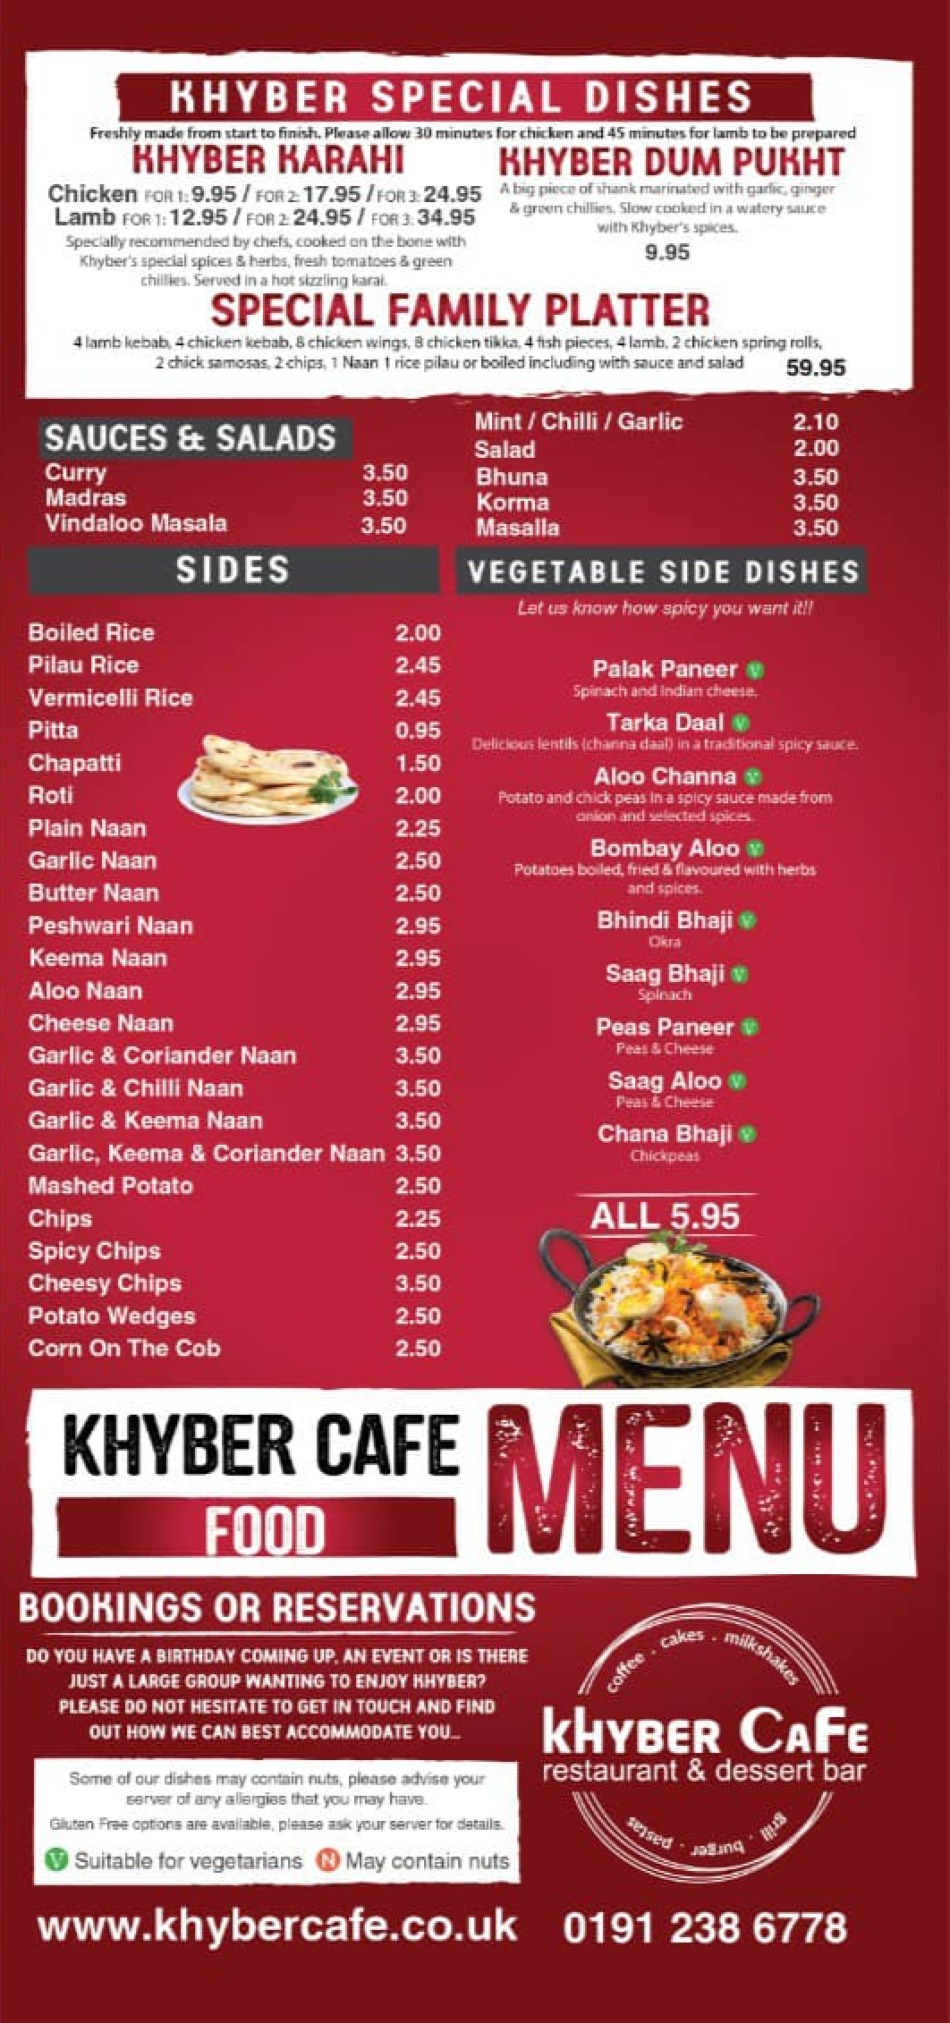 Takeaway Restaurant Menu Page - Khyber Cafe - Newcastle upon Tyne